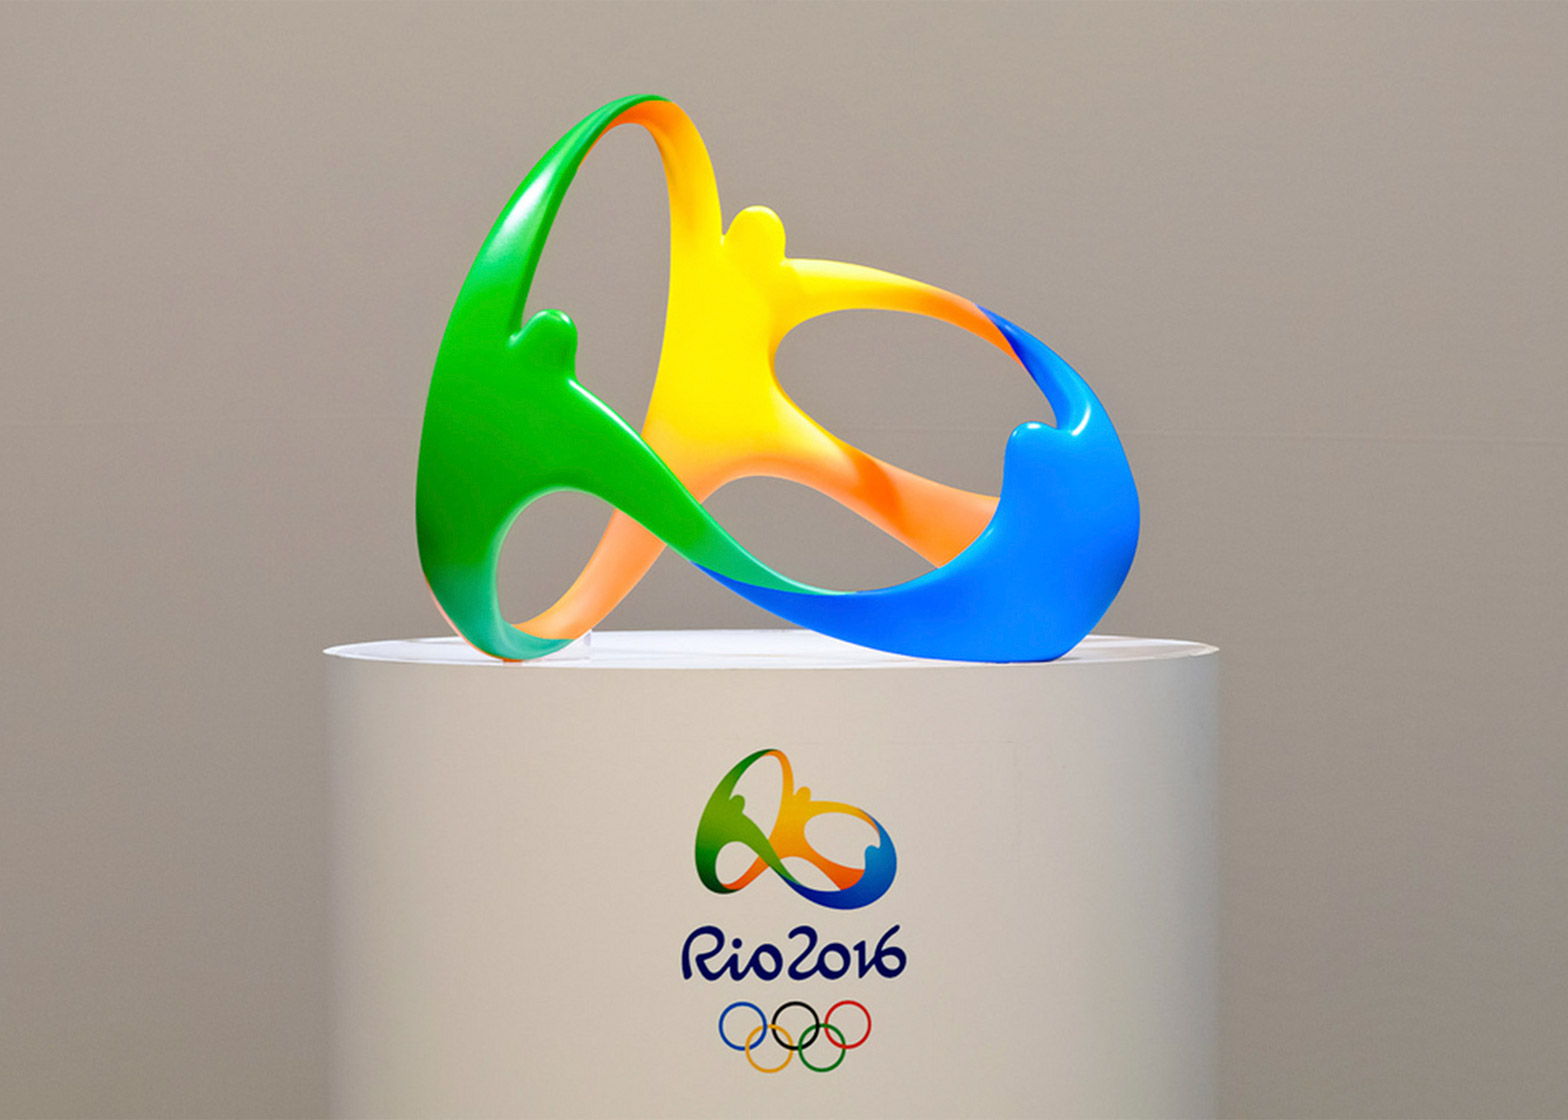 Rio 16 Motif Is First 3d Logo In The History Of The Olympics Says Designer